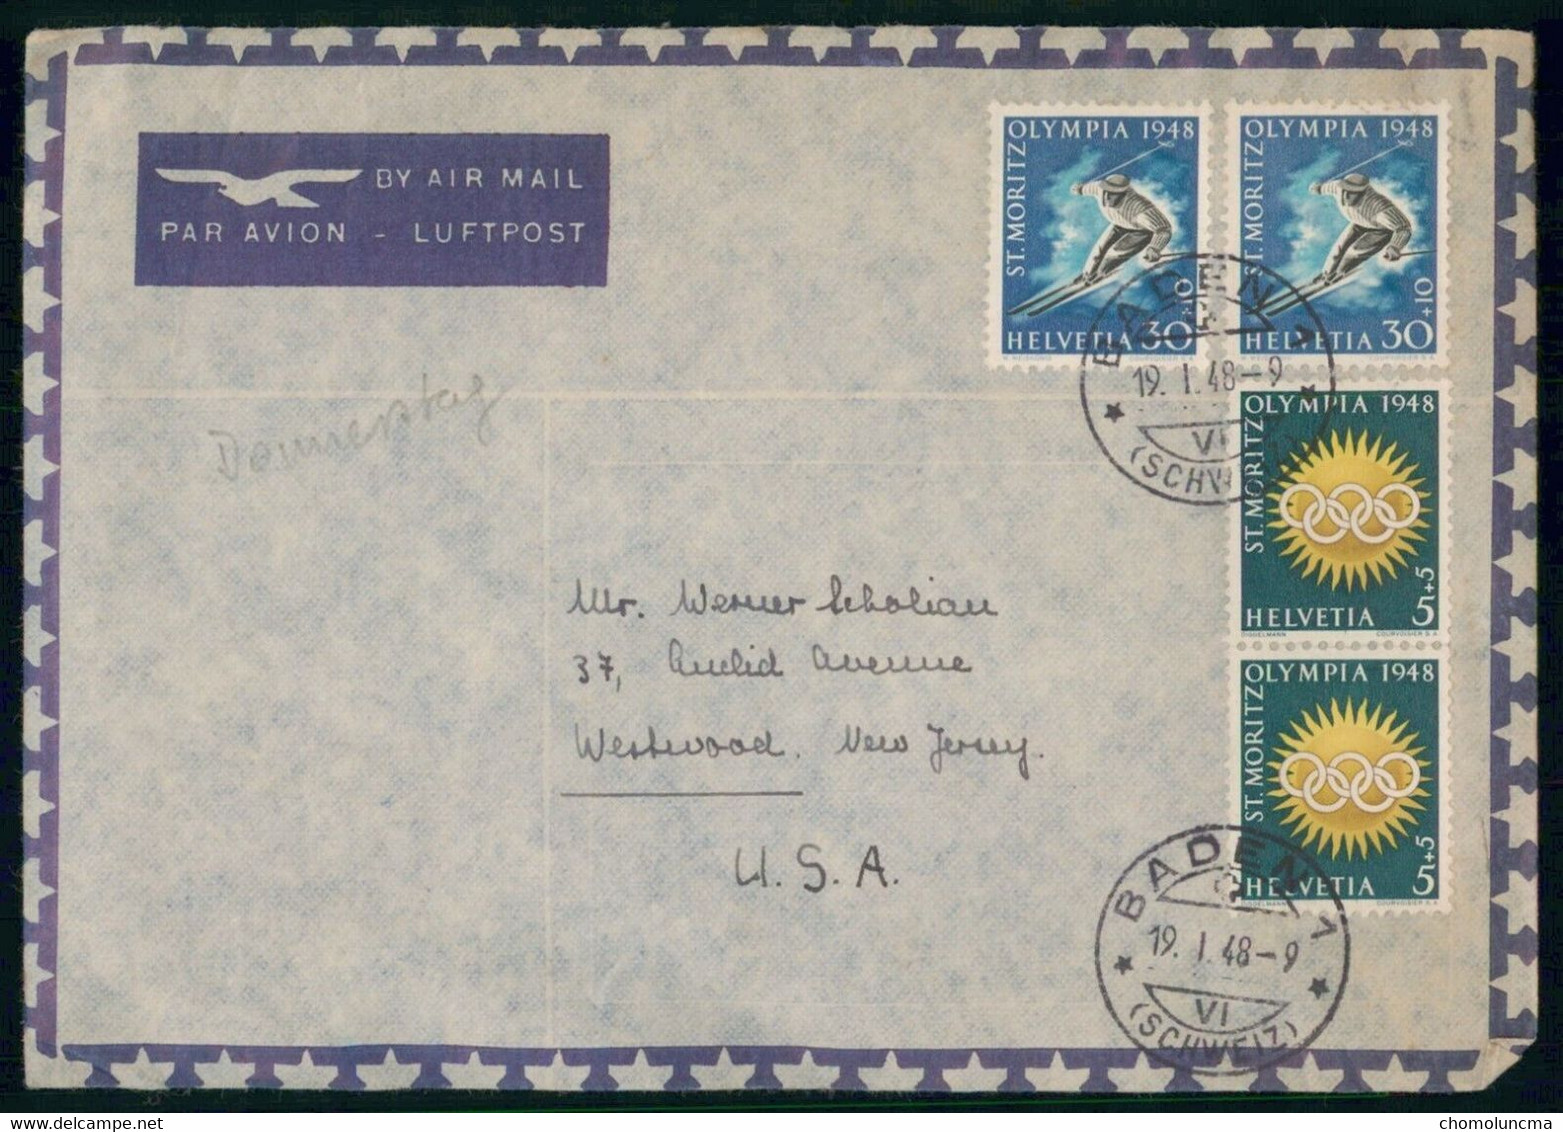 1948 St Moritz Winter Olympic Games Jeux Olympiques D'Hiver Olympische Winterspiele Cover To Westwood USA - Hiver 1948: St-Moritz